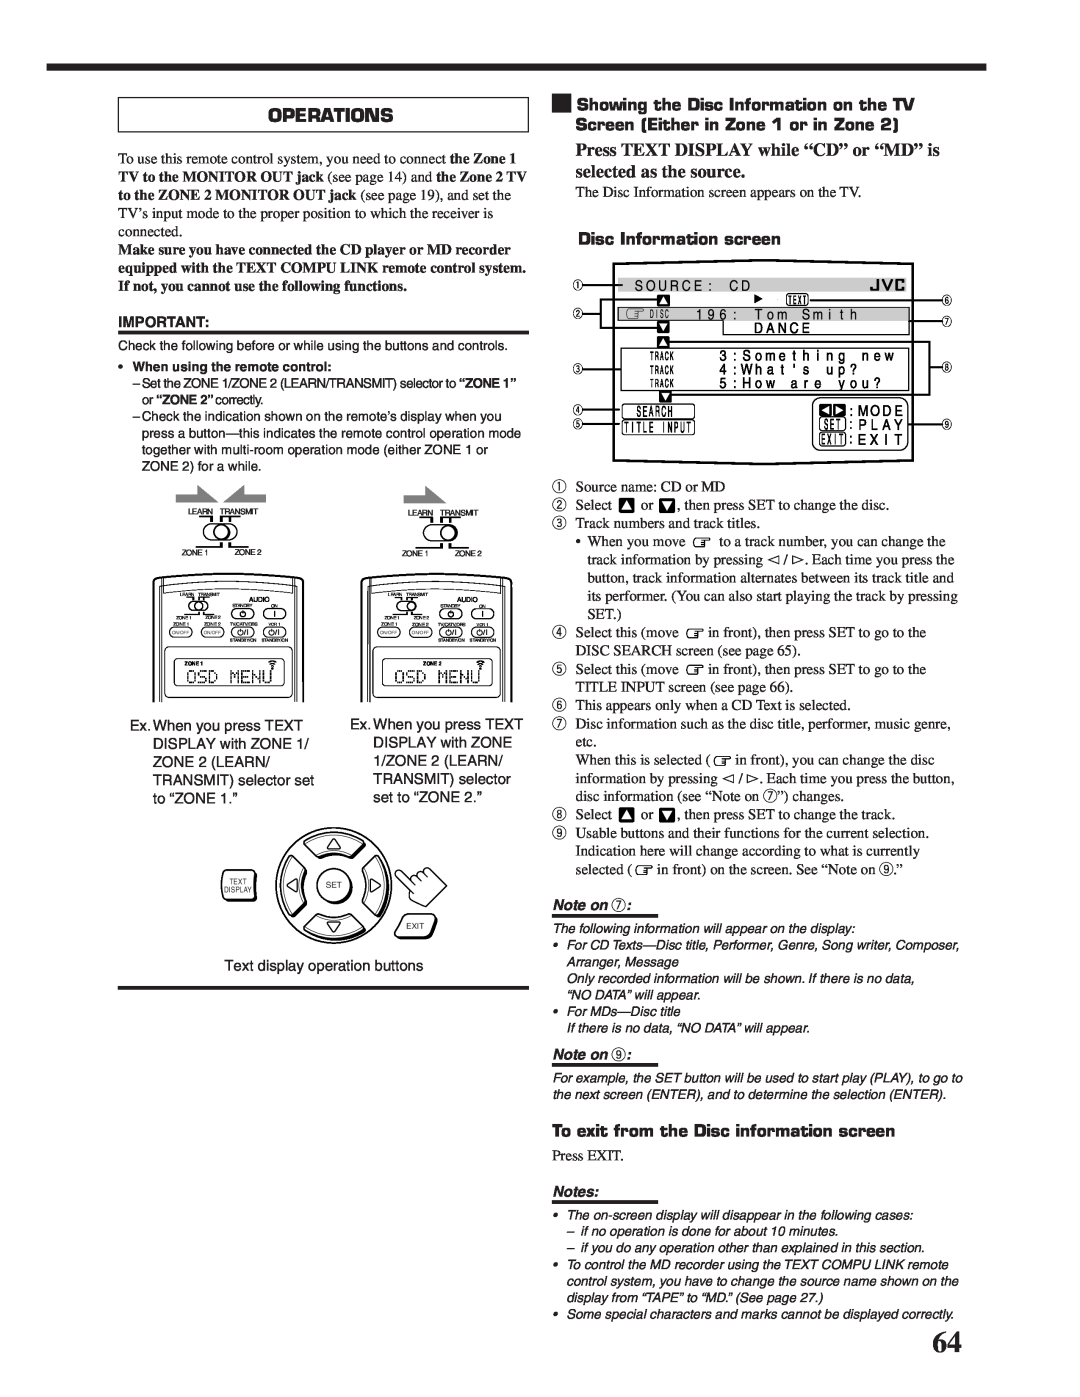 JVC RX-DP20VBK manual Operations, Disc Information screen, To exit from the Disc information screen, Note on, Notes 